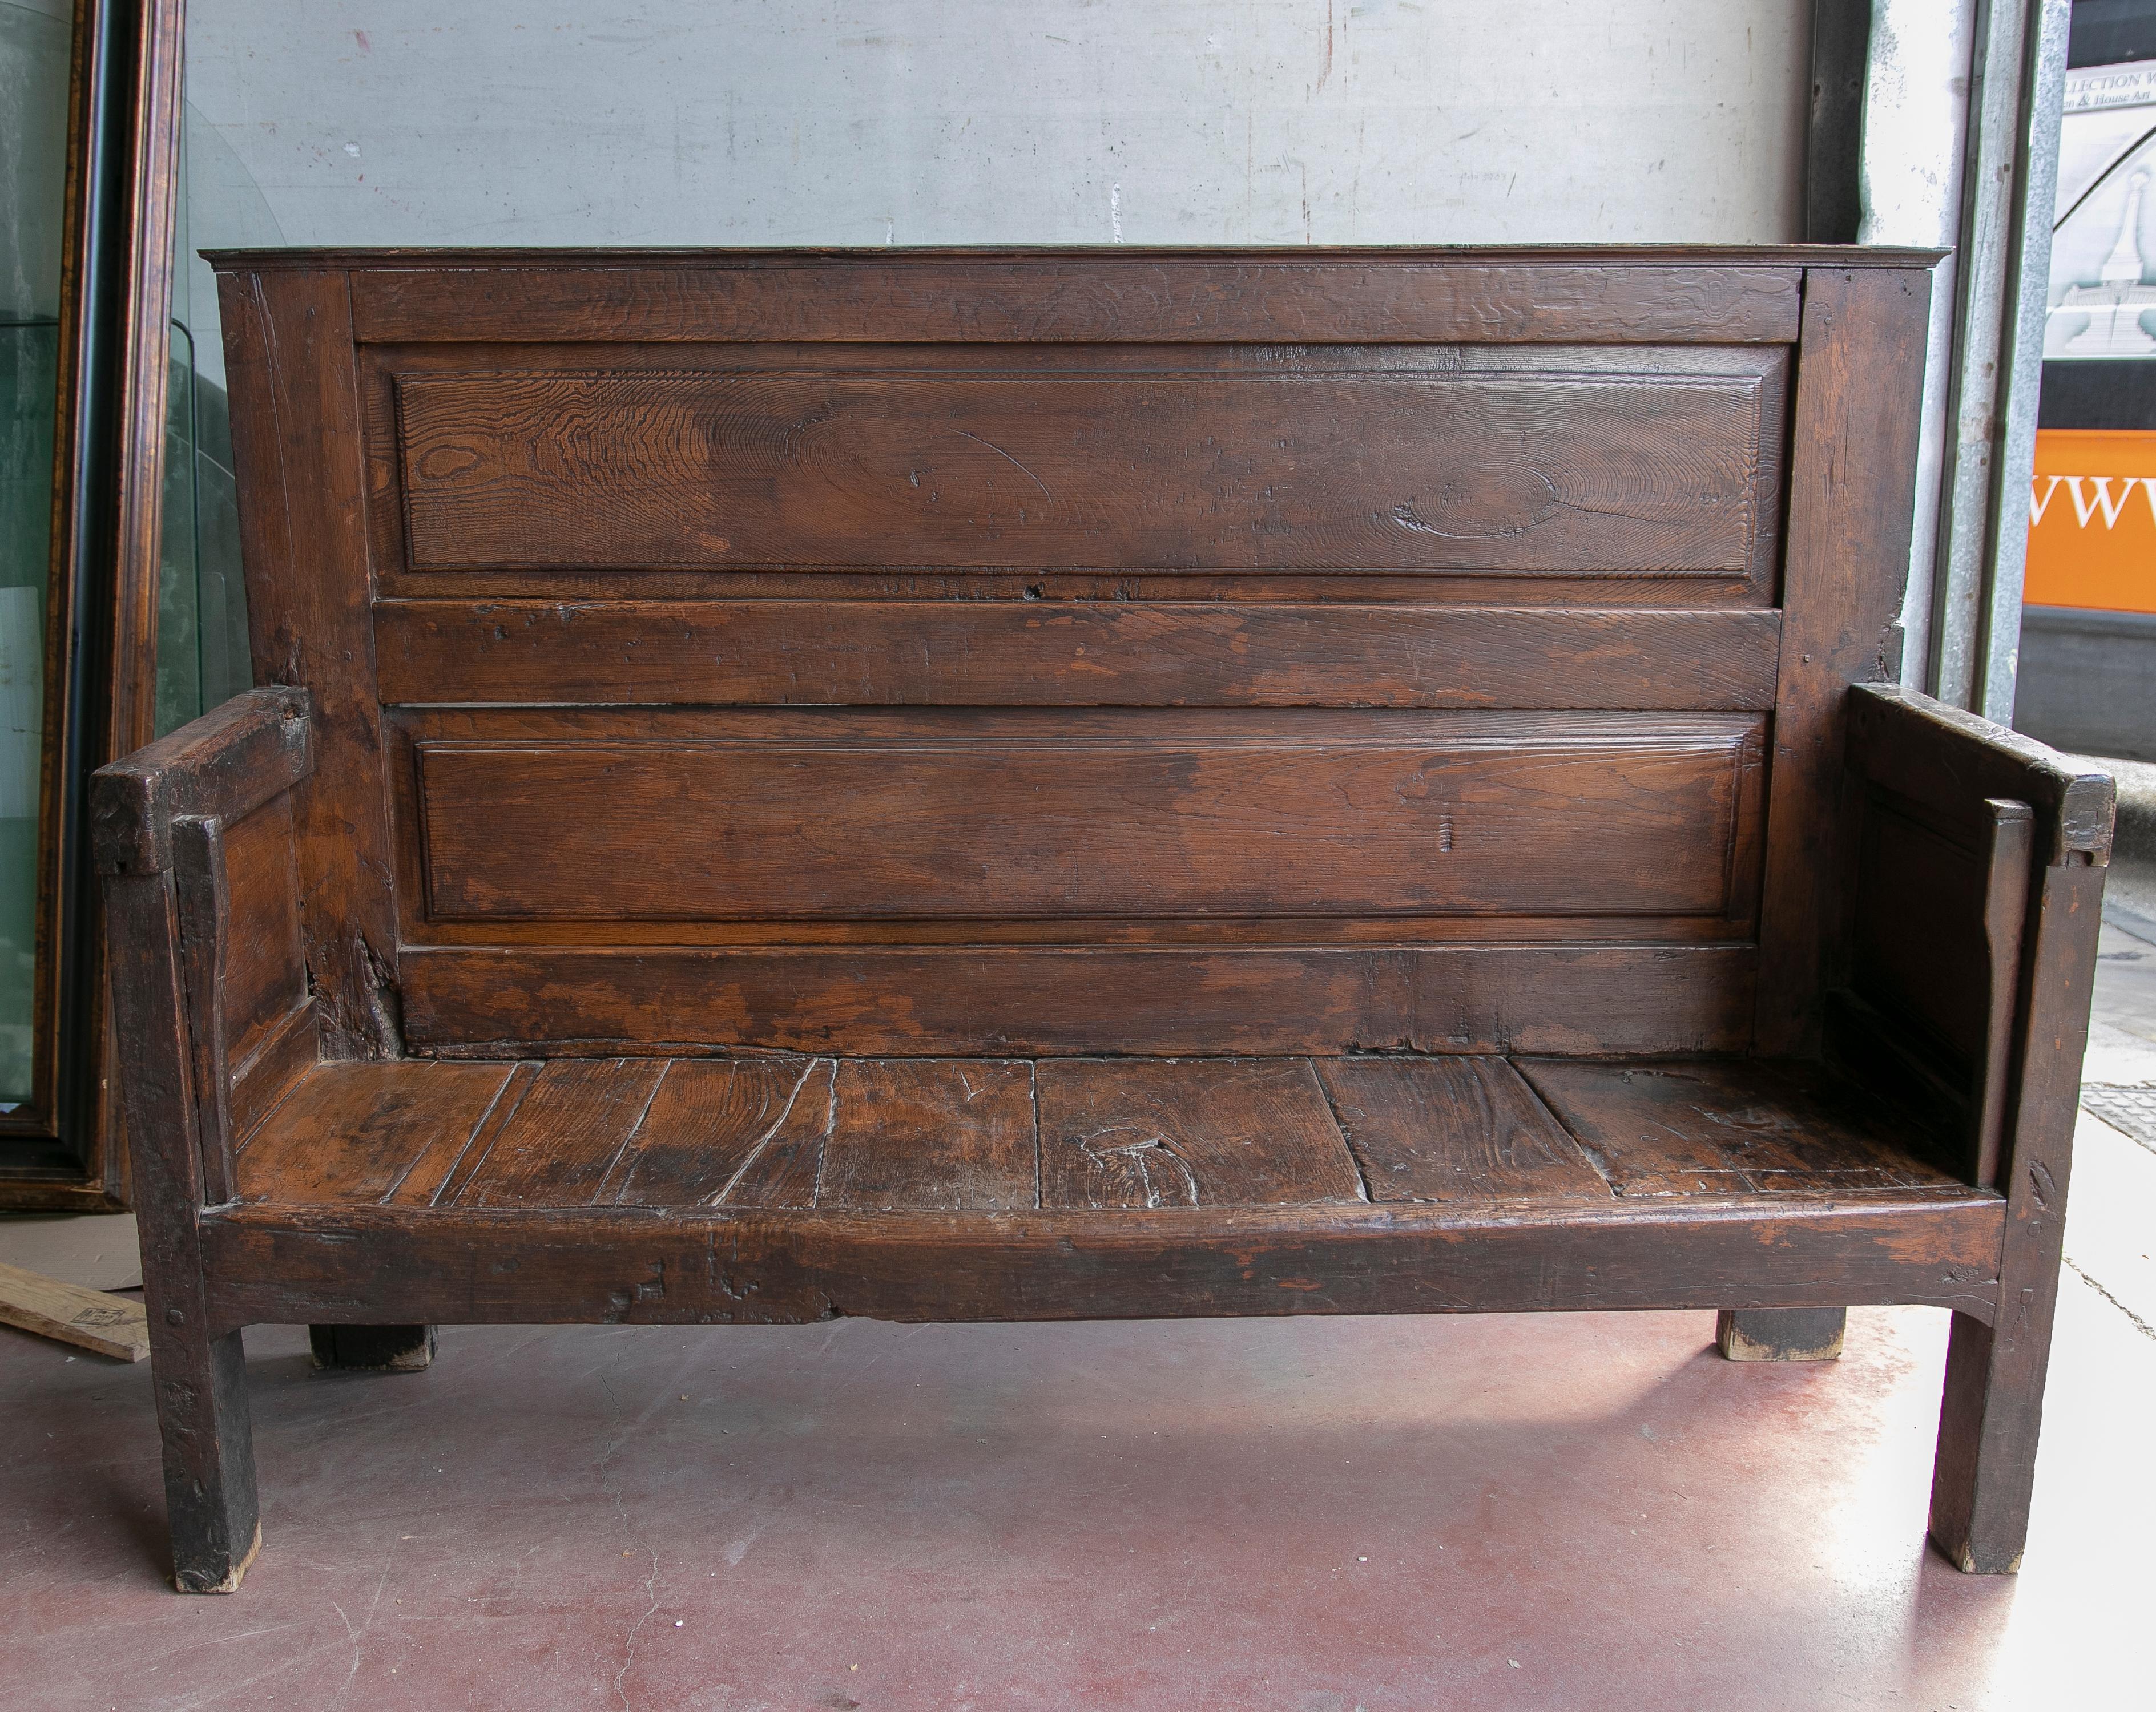 19th Century rustic hand carved wooden bench.